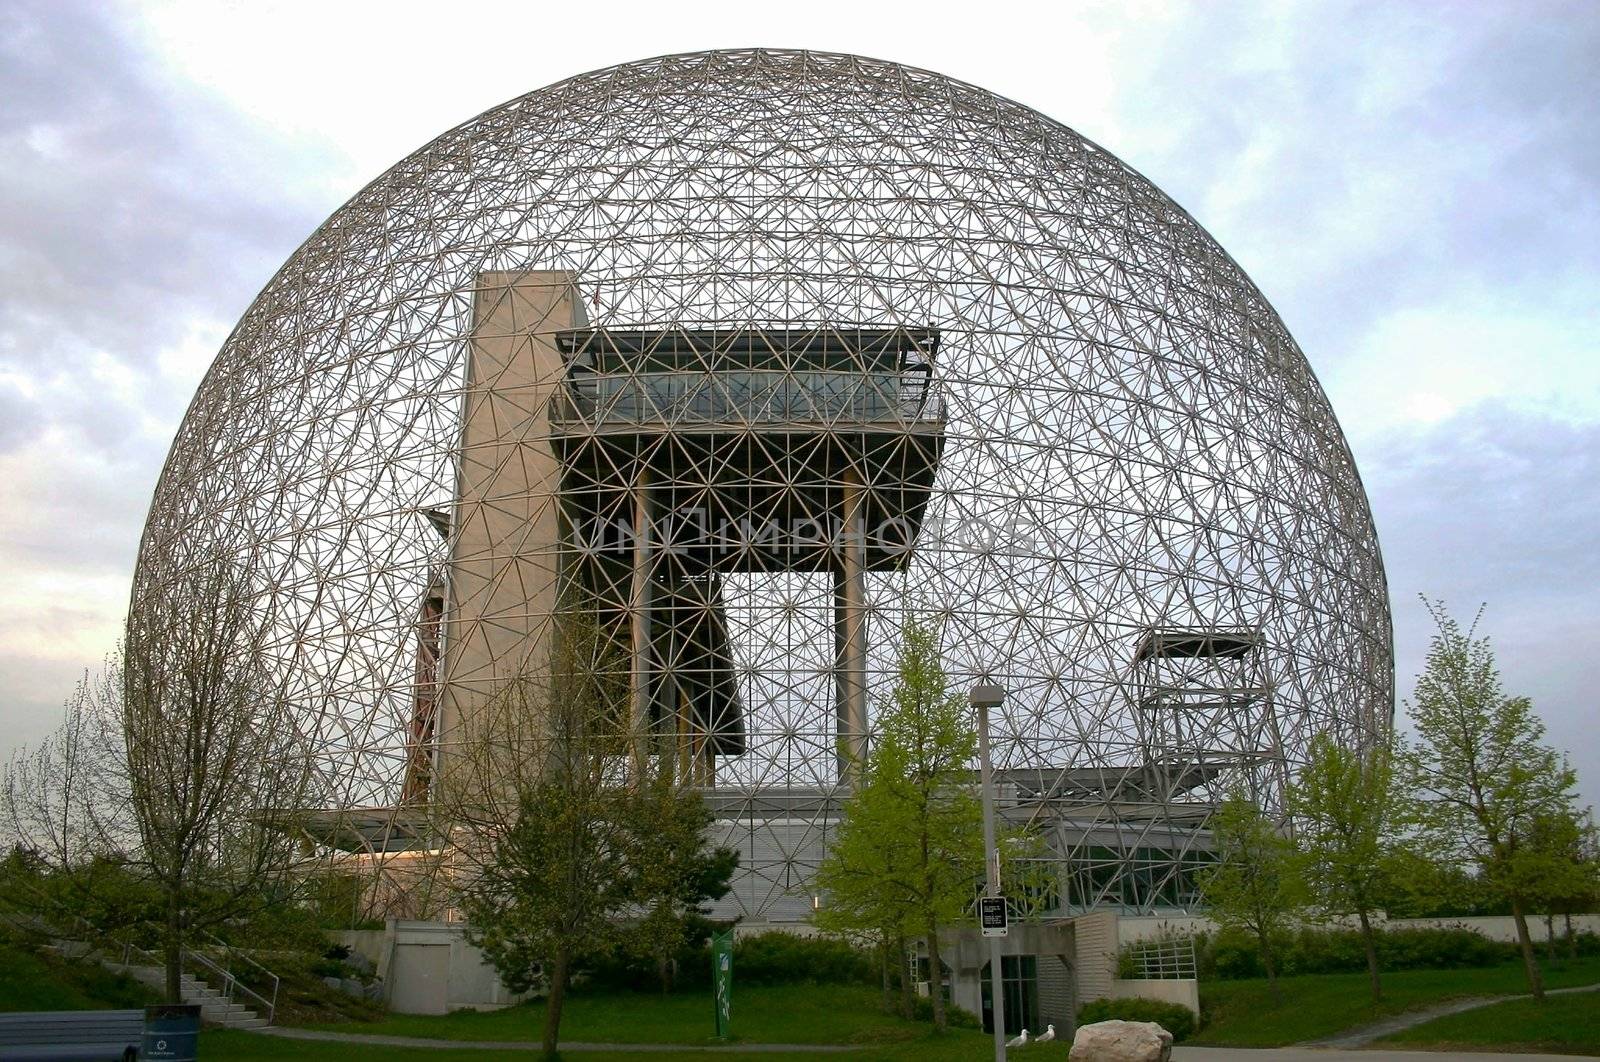 Geodisic dôme from expo 67